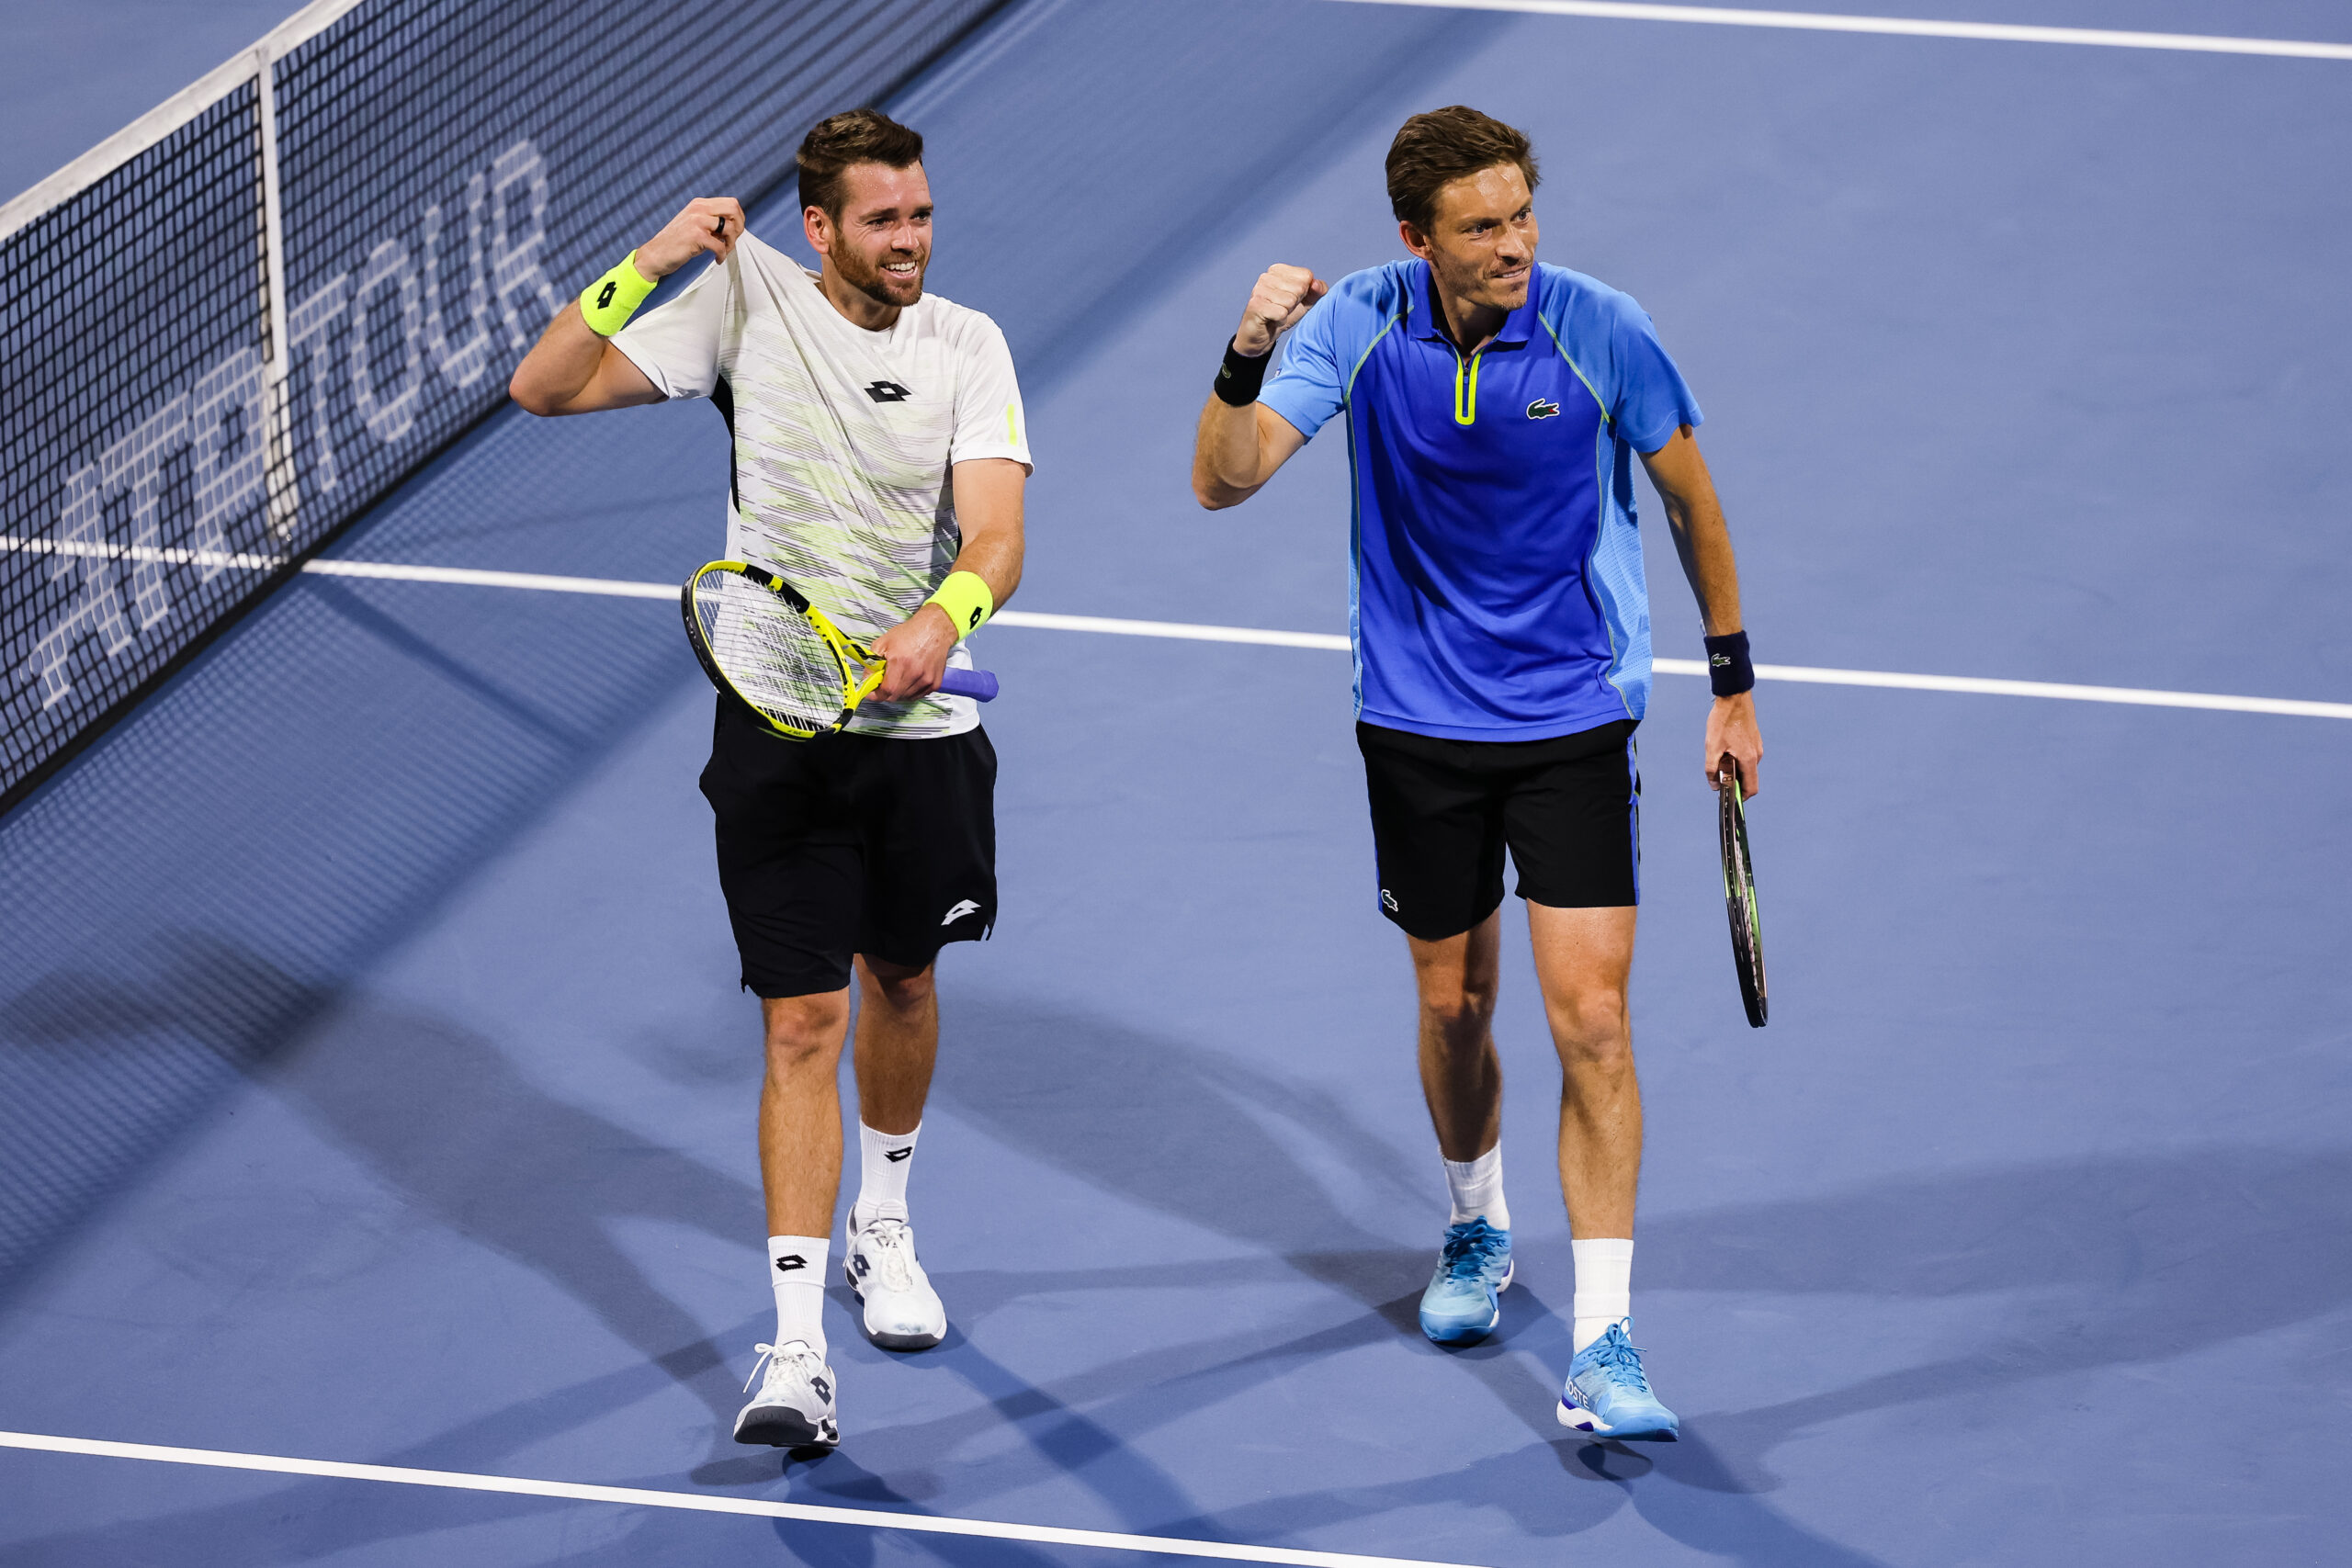 Austing Krajicek (left) and partner Nicolas Mahut are happy after reaching the finals of the 2023 Miami Open in Miami Gardens, Florida.